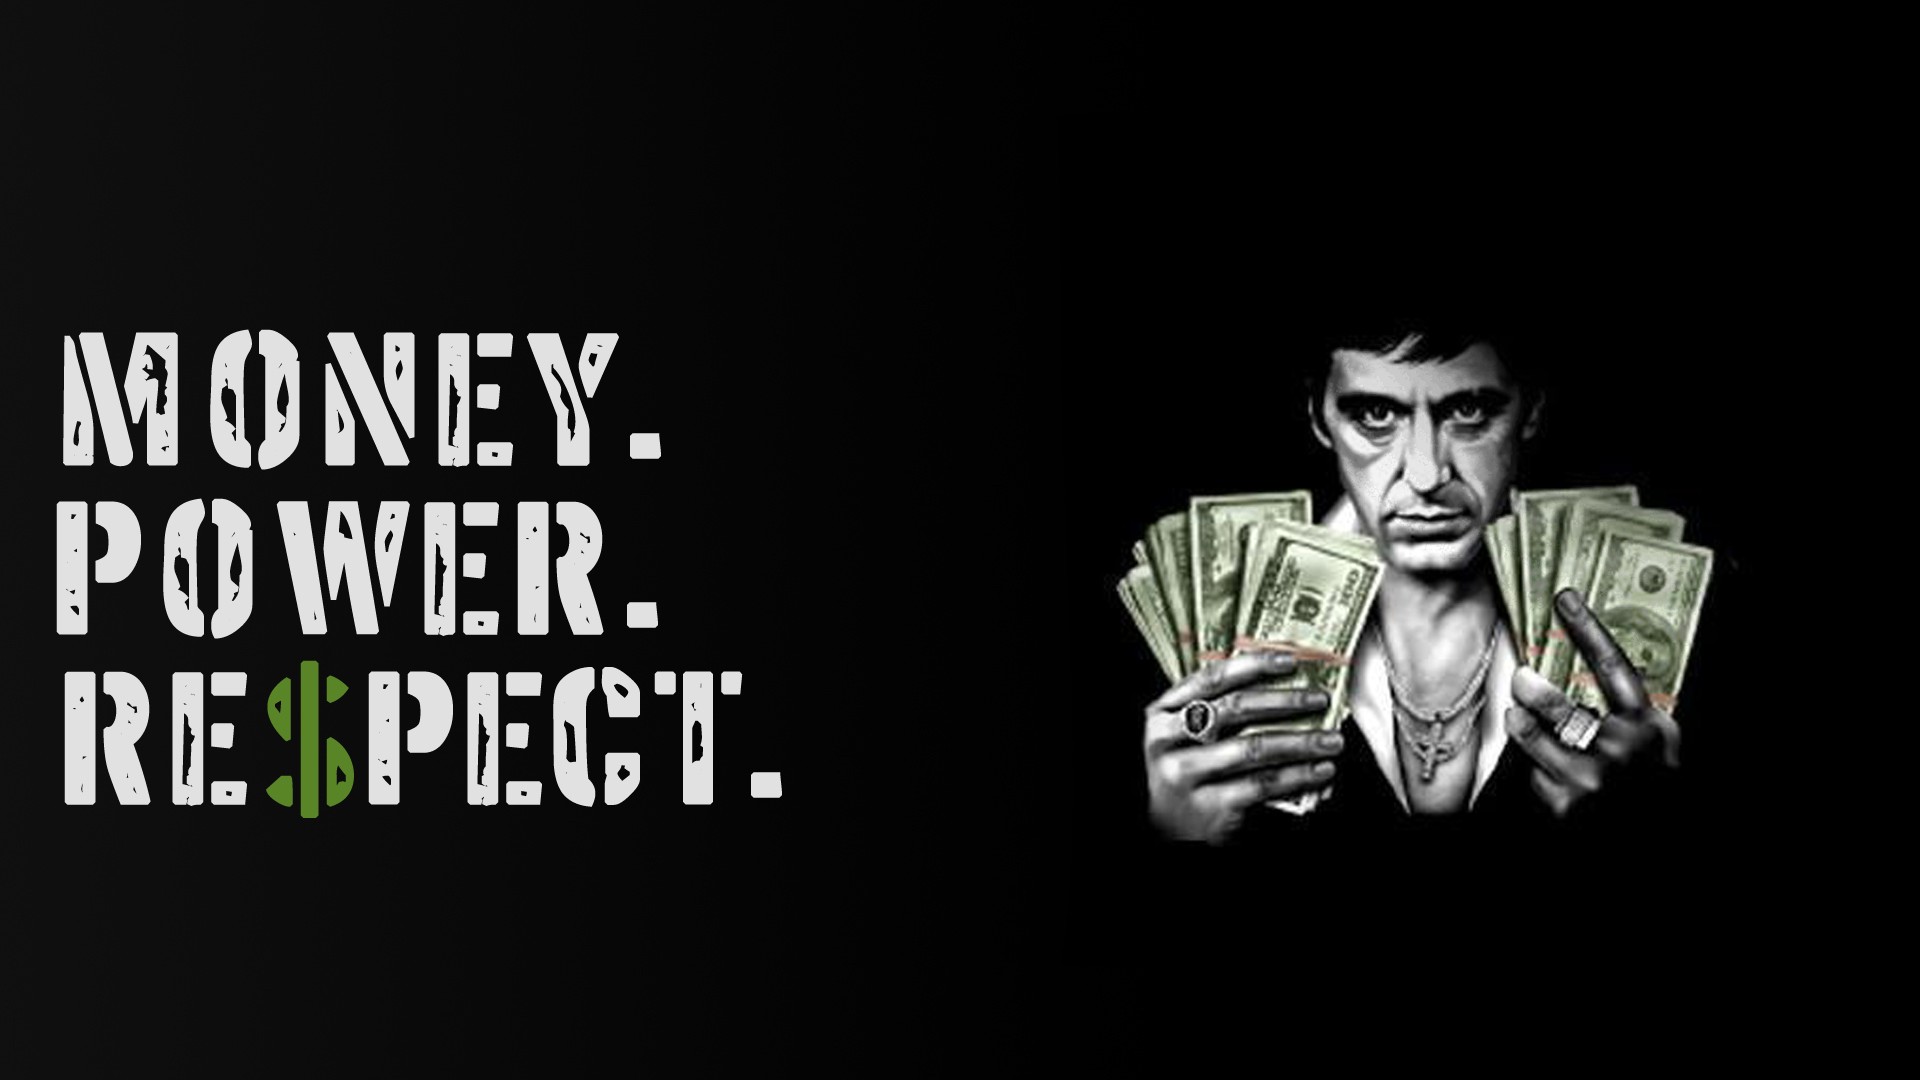 Gangster Quotes HD Wallpaper 4 1920x1080